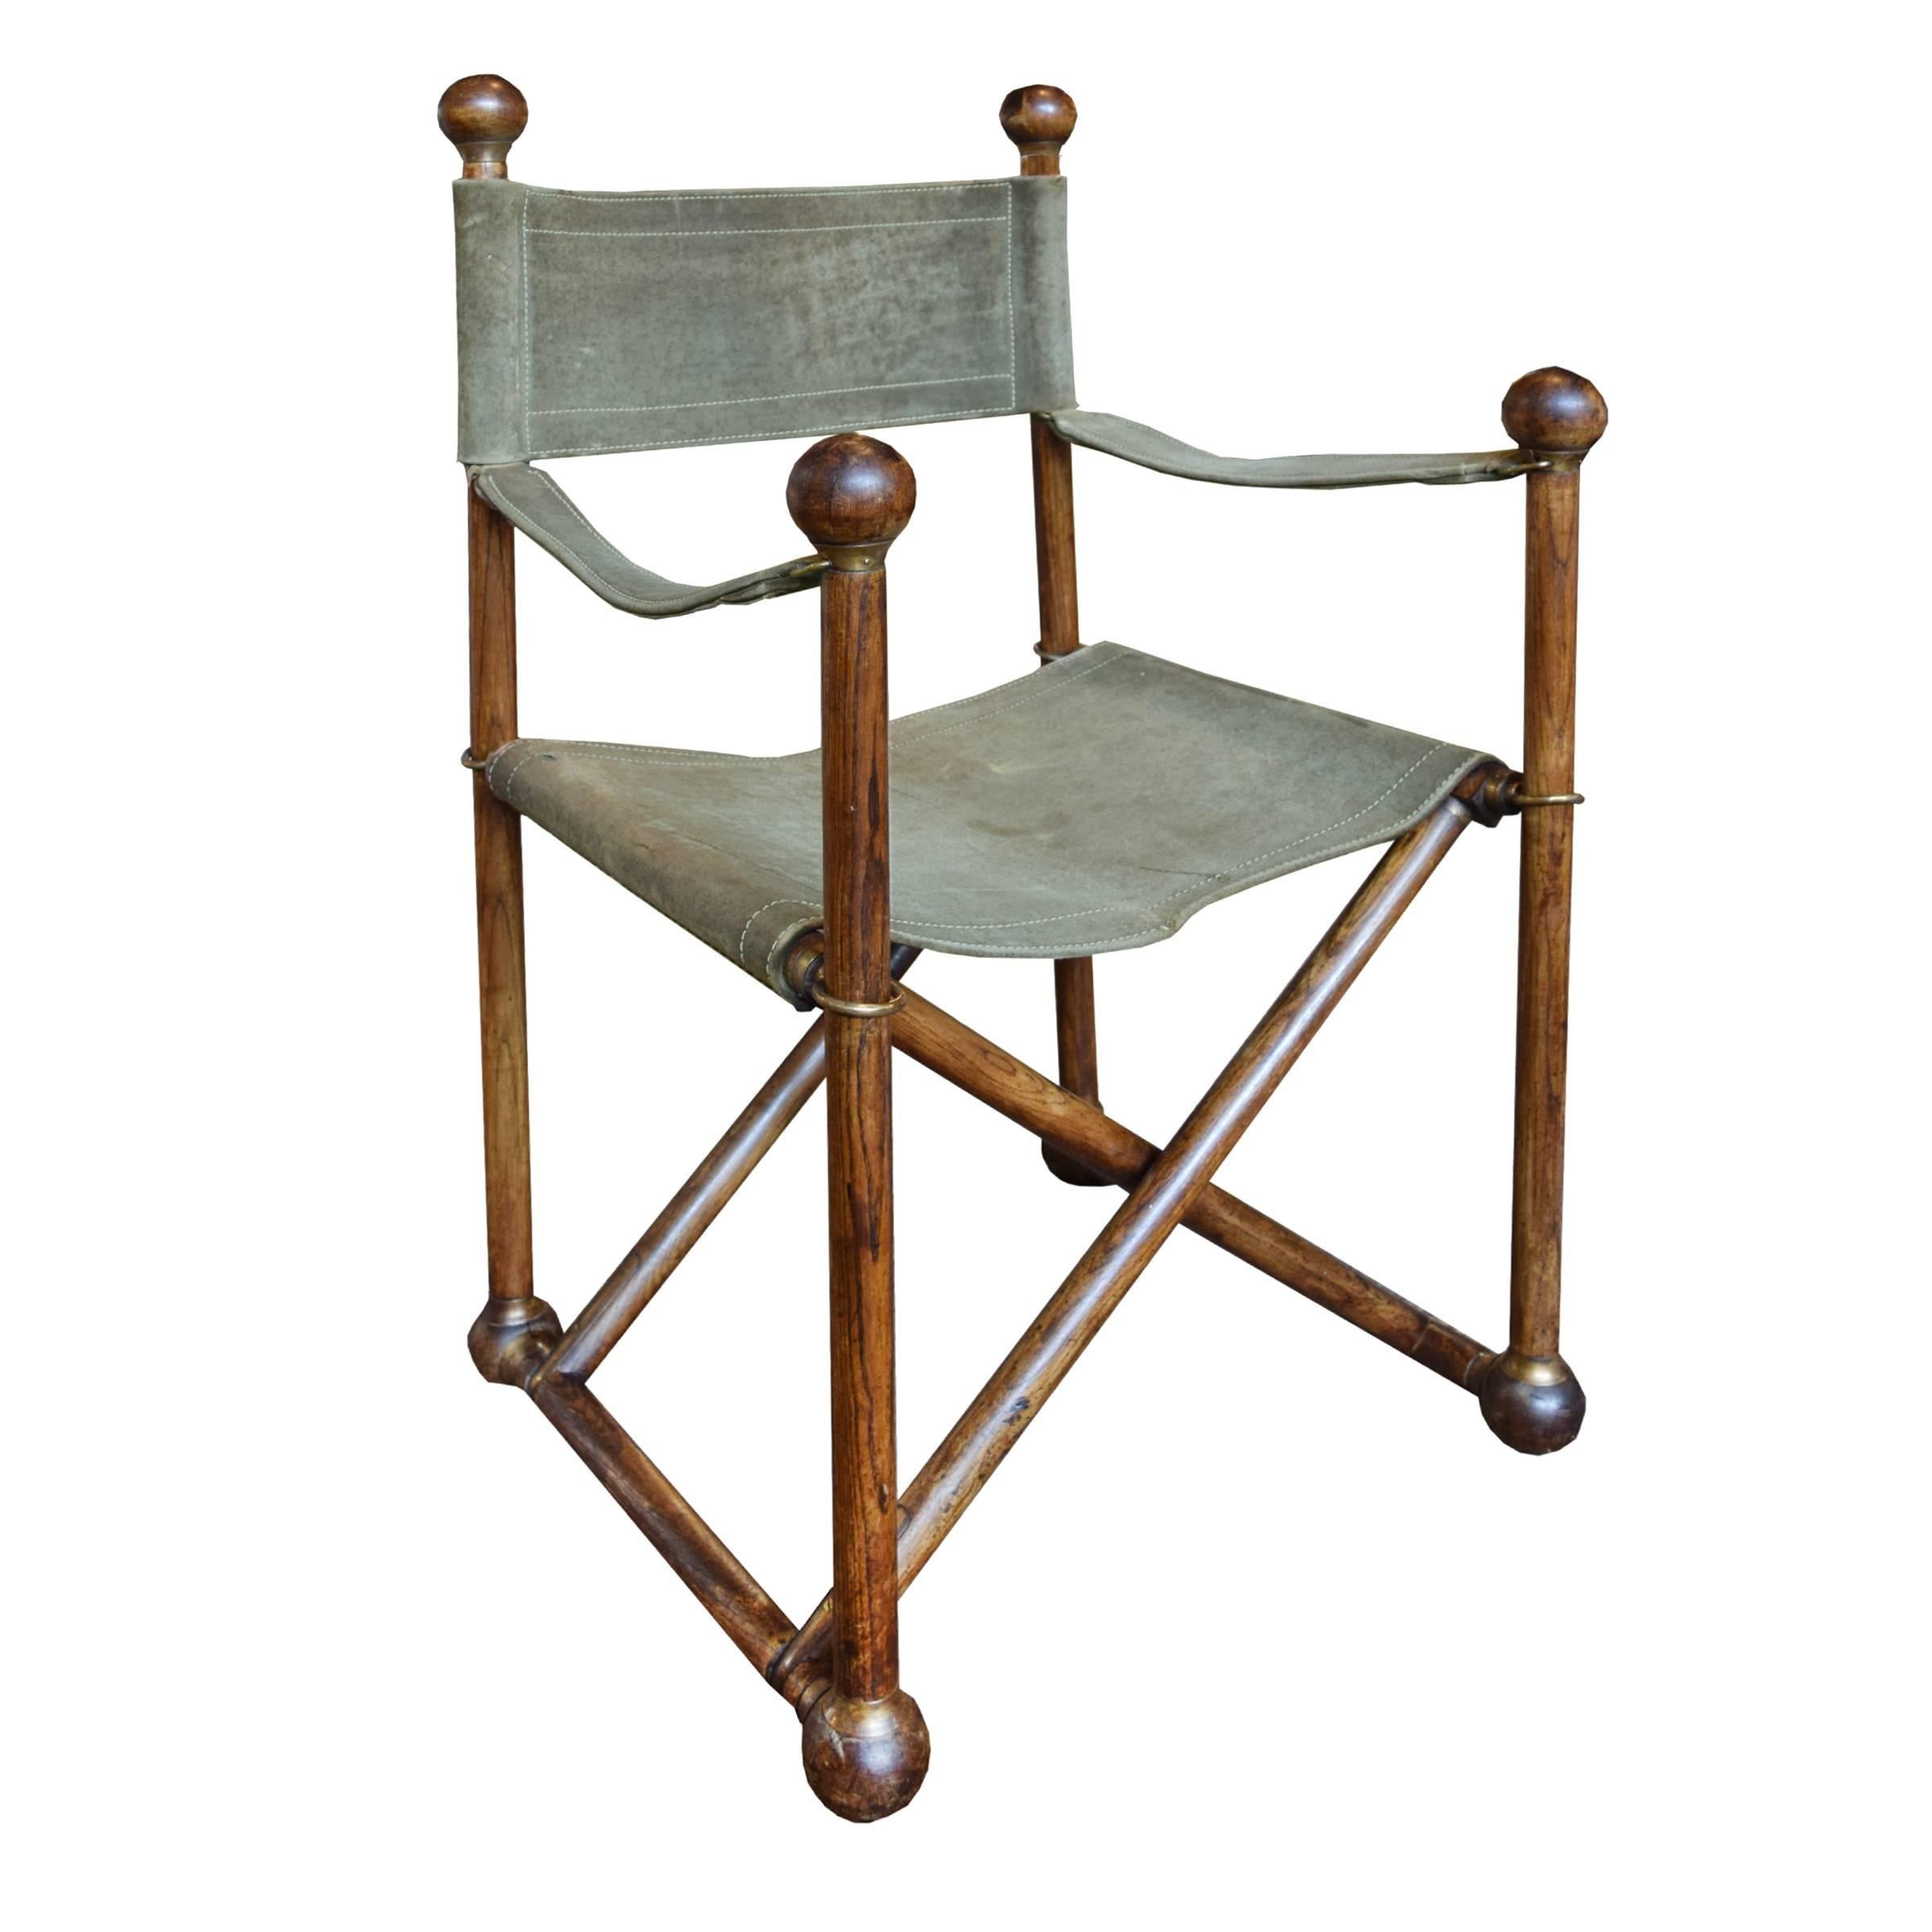 A French Campaign style wood frame folding chair with original suede seat, arms and back, having ball feet and finials and wonderful brass hardware.